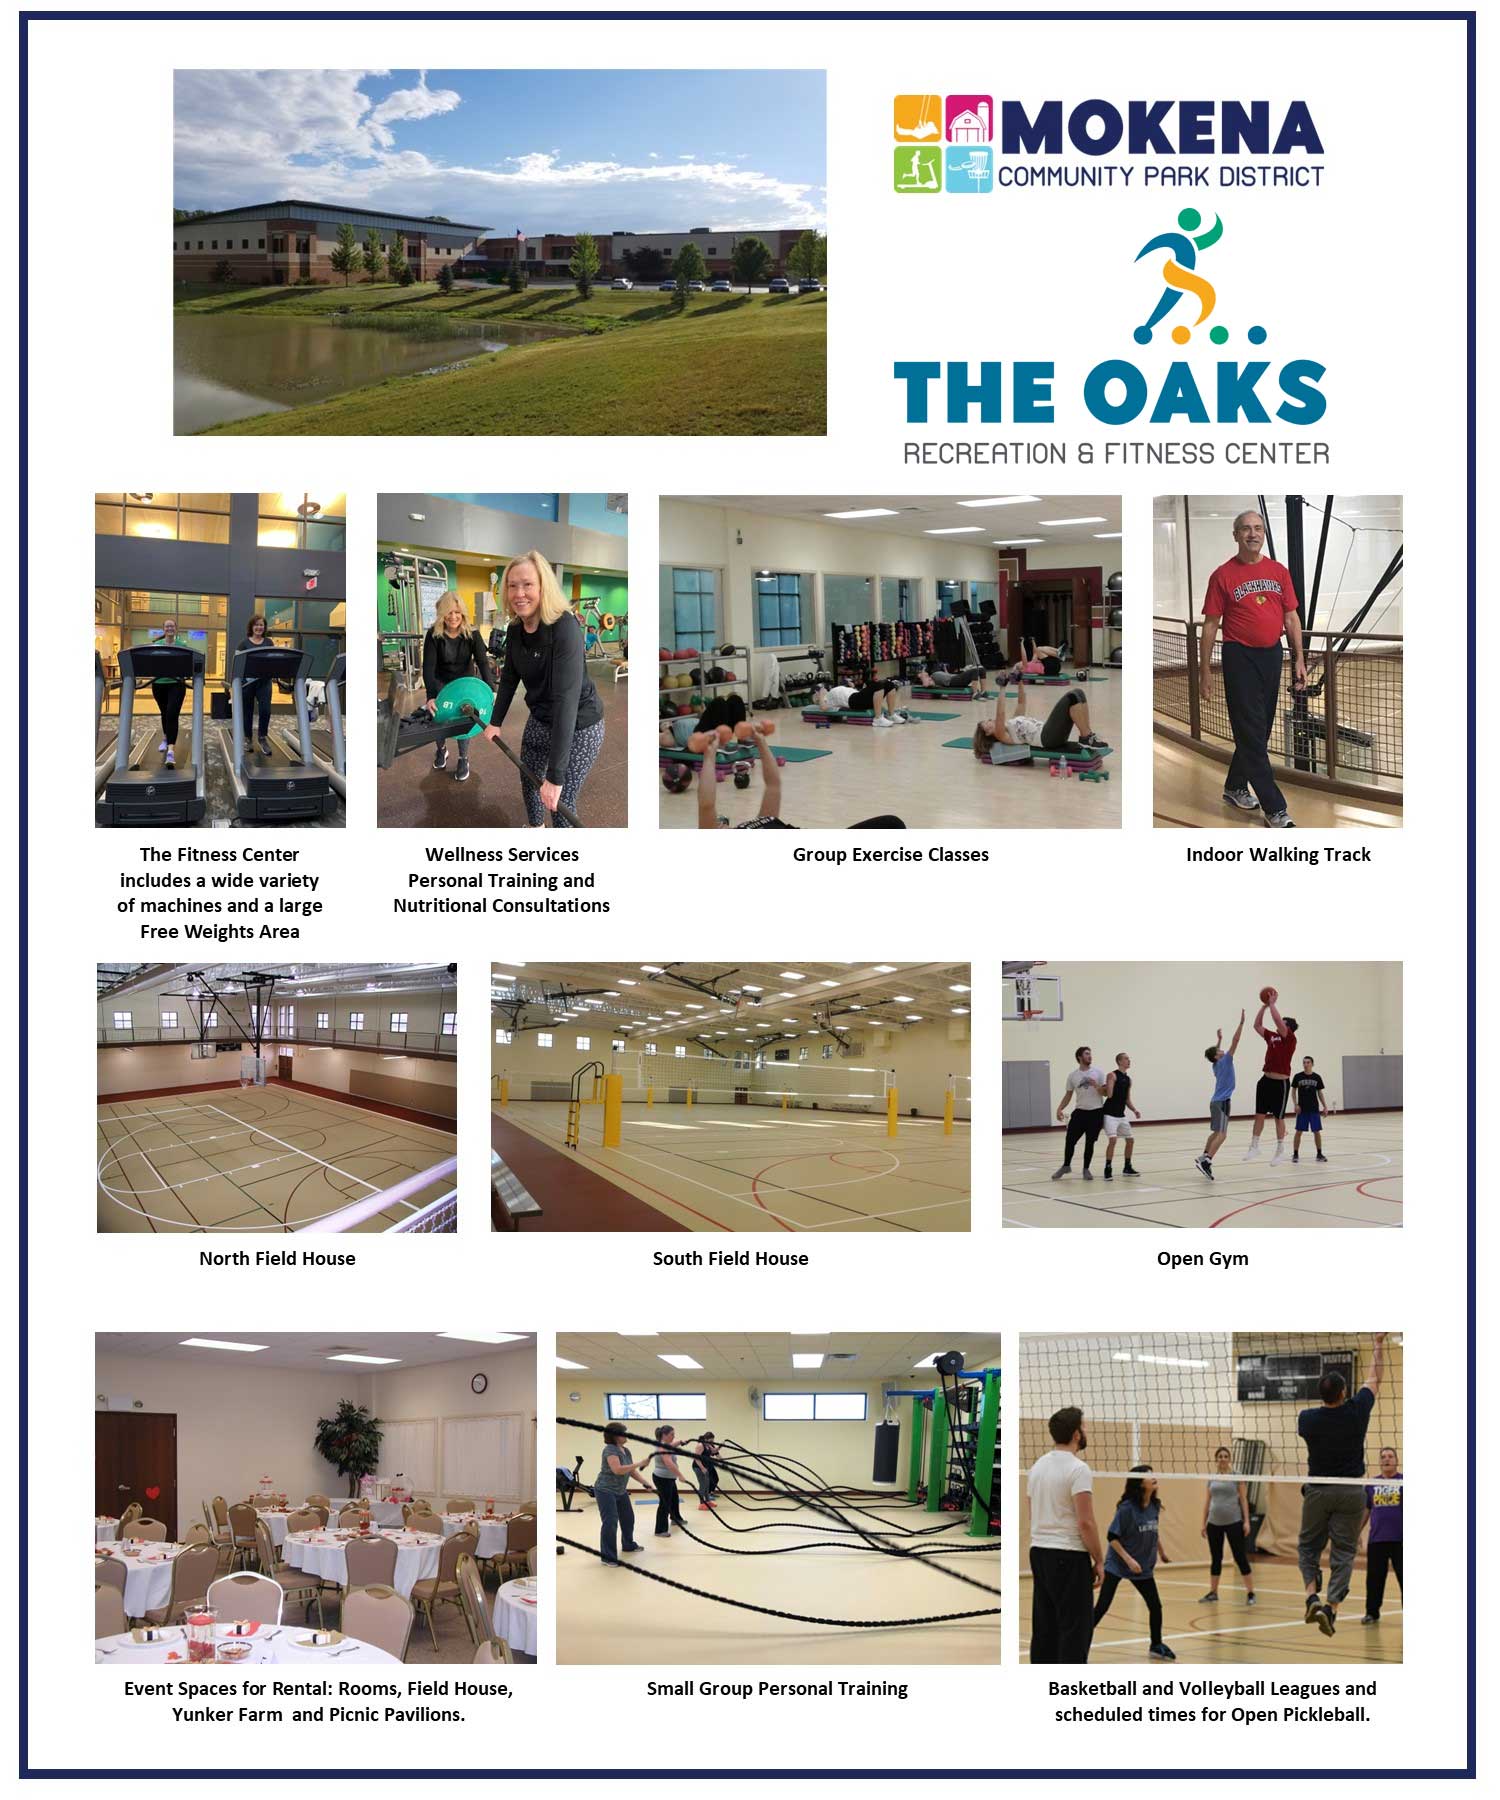 THE OAKS RECREATION AND FITNESS CENTER